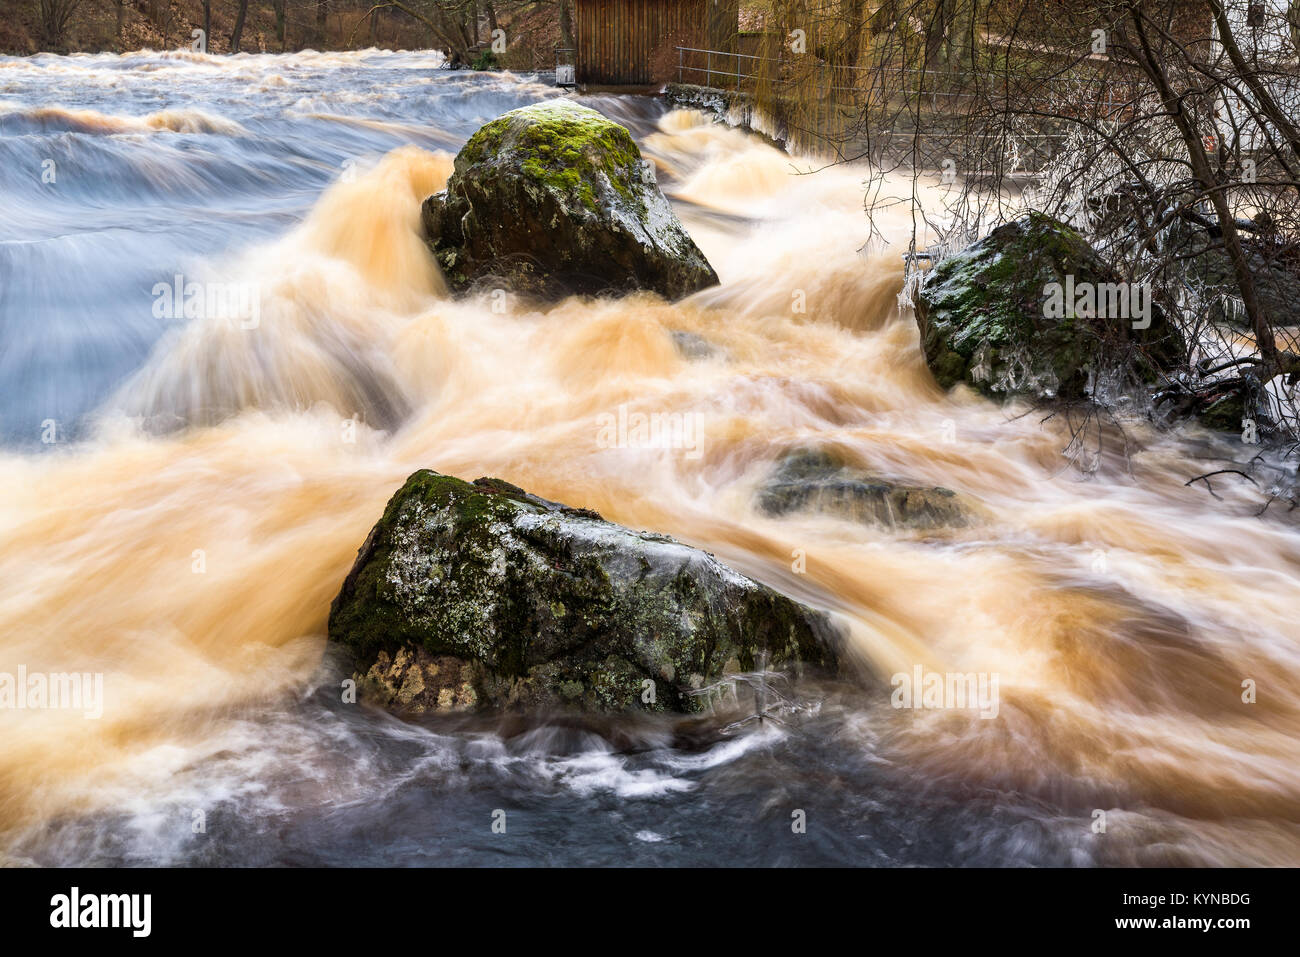 Early spring flood in the Morrum river in Sweden. Extreme amounts of water makes the river overflow and the water rush furiously over rocks and trees. Stock Photo